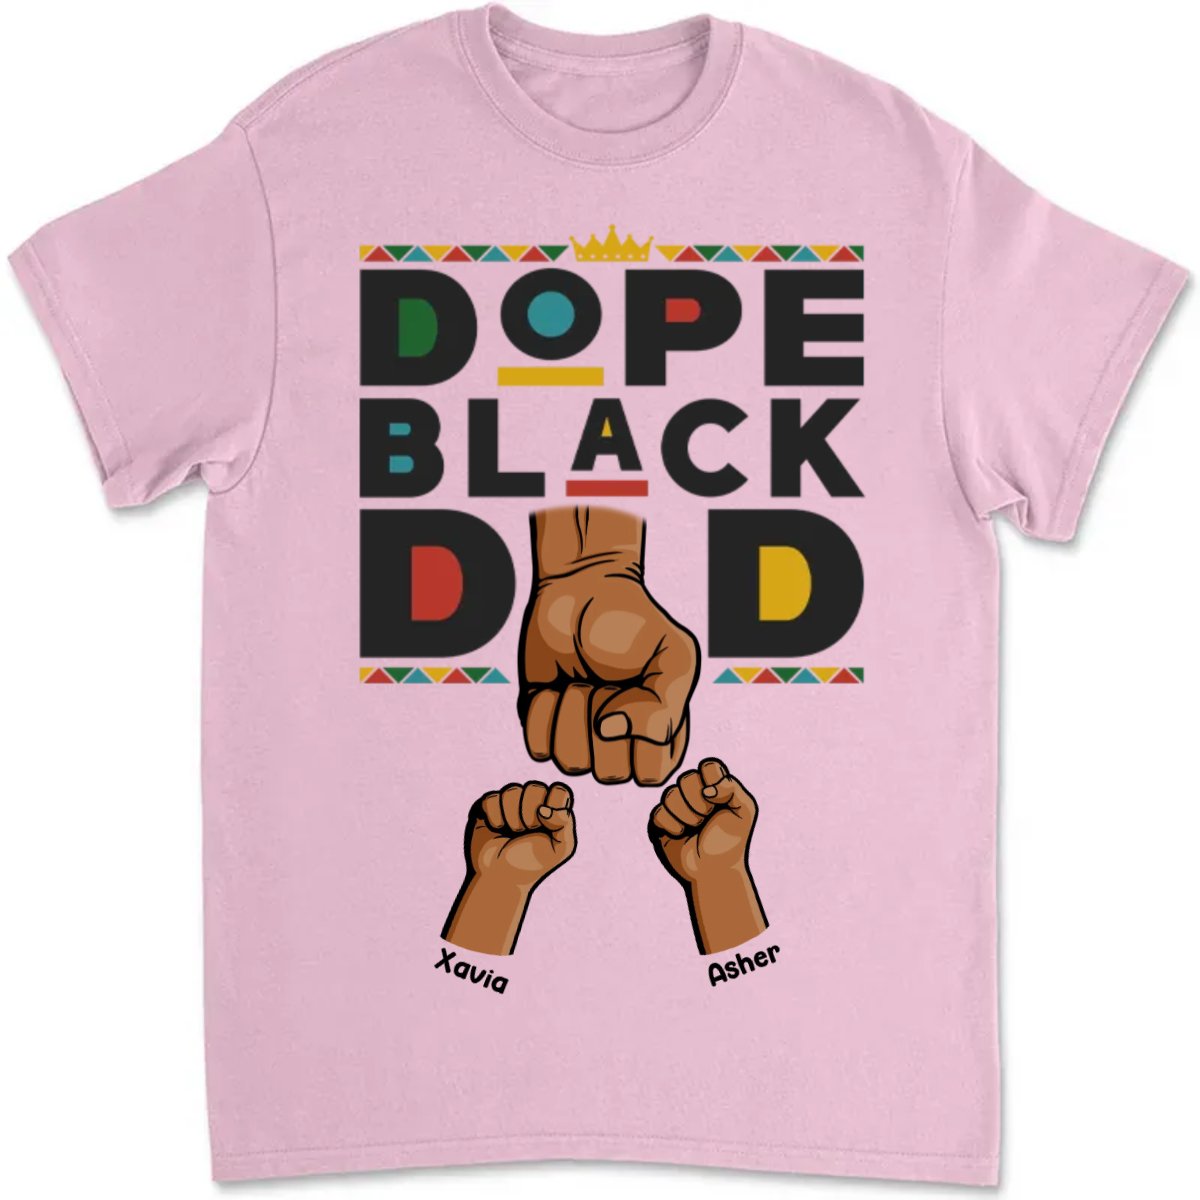 Father - Dope Black Dad - Personalized T - shirt - The Next Custom Gift